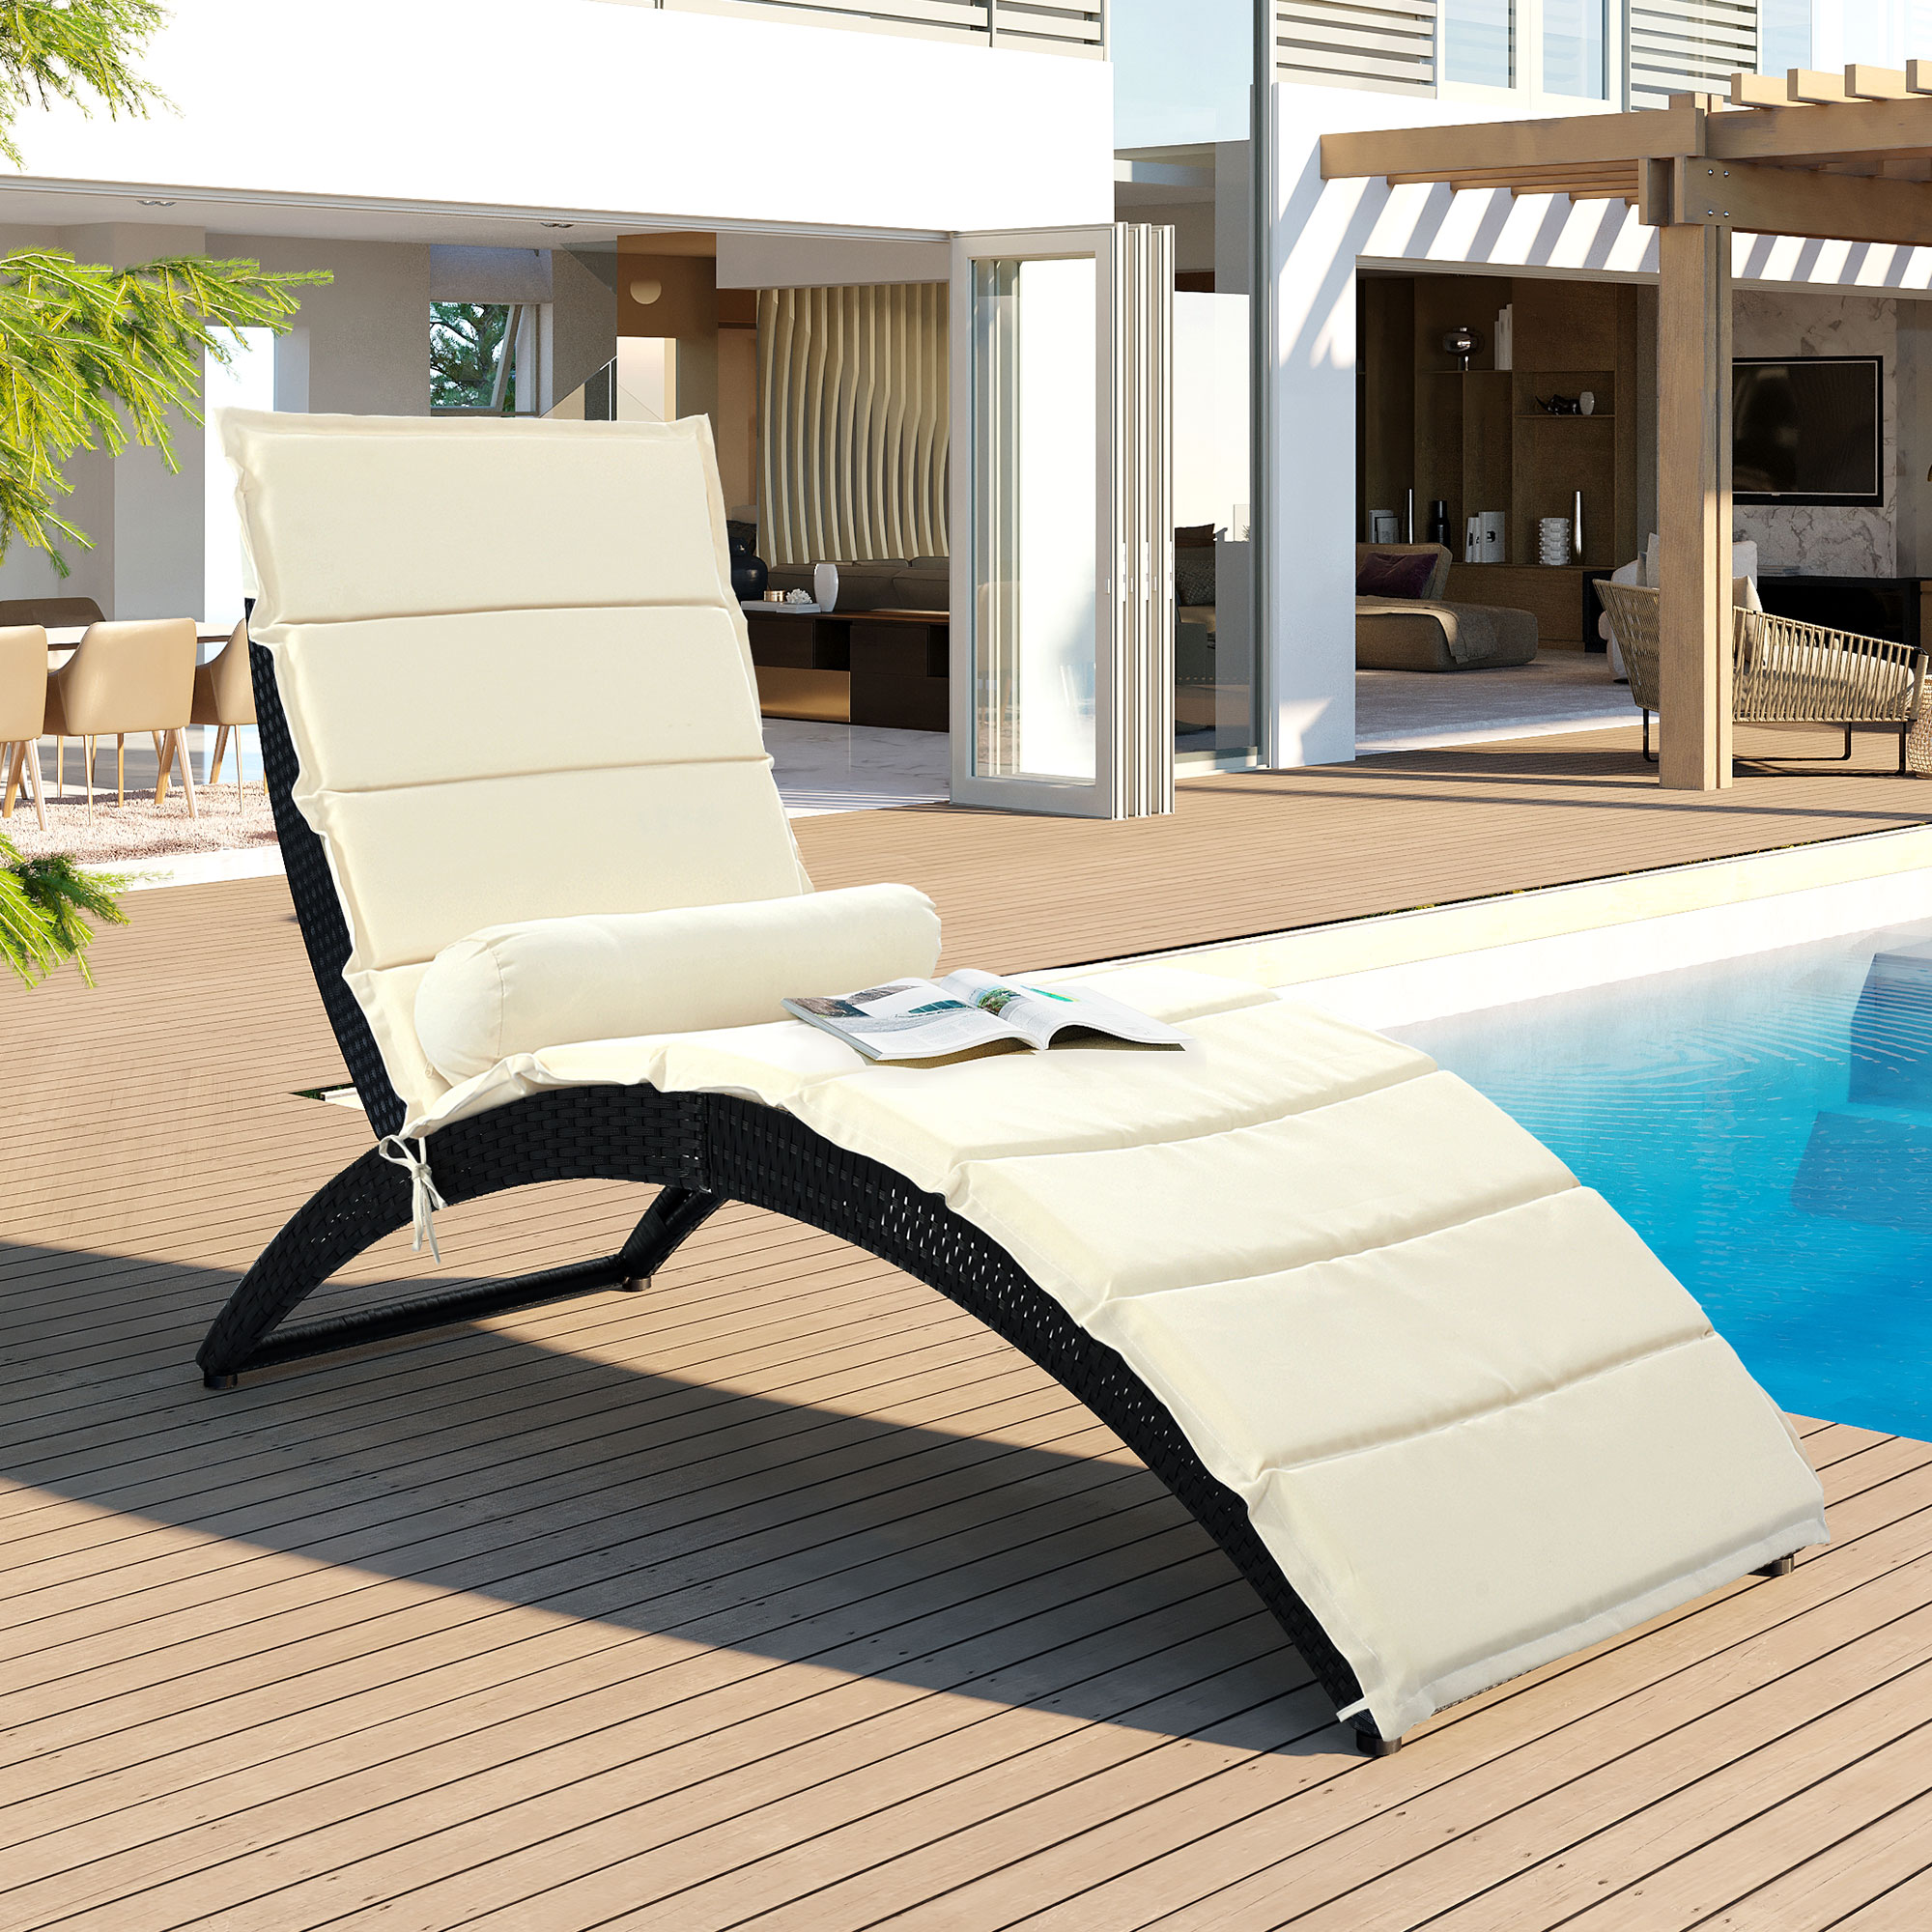 Patio Chaise Lounge, Removeble Reclining Camping Chair, PE Rattan Foldable Sun Recliner Chair with Seat Cushion, Poolside Garden Outdoor Chaise Lounge Chairs, JA1102 - image 2 of 8